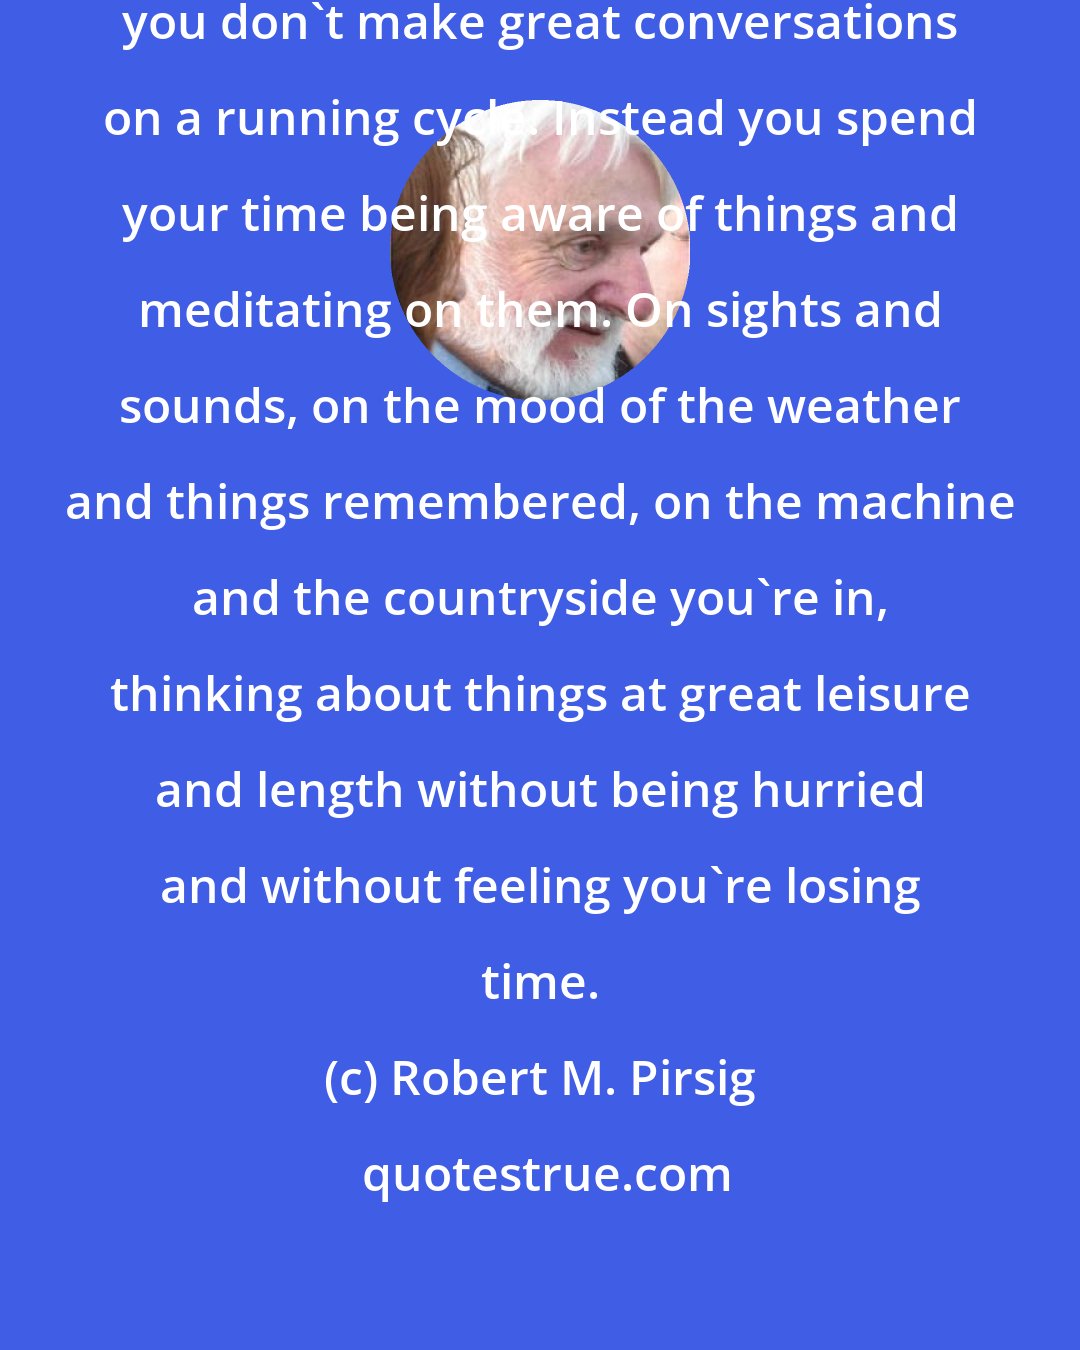 Robert M. Pirsig: Unless you're fond of hollering you don't make great conversations on a running cycle. Instead you spend your time being aware of things and meditating on them. On sights and sounds, on the mood of the weather and things remembered, on the machine and the countryside you're in, thinking about things at great leisure and length without being hurried and without feeling you're losing time.